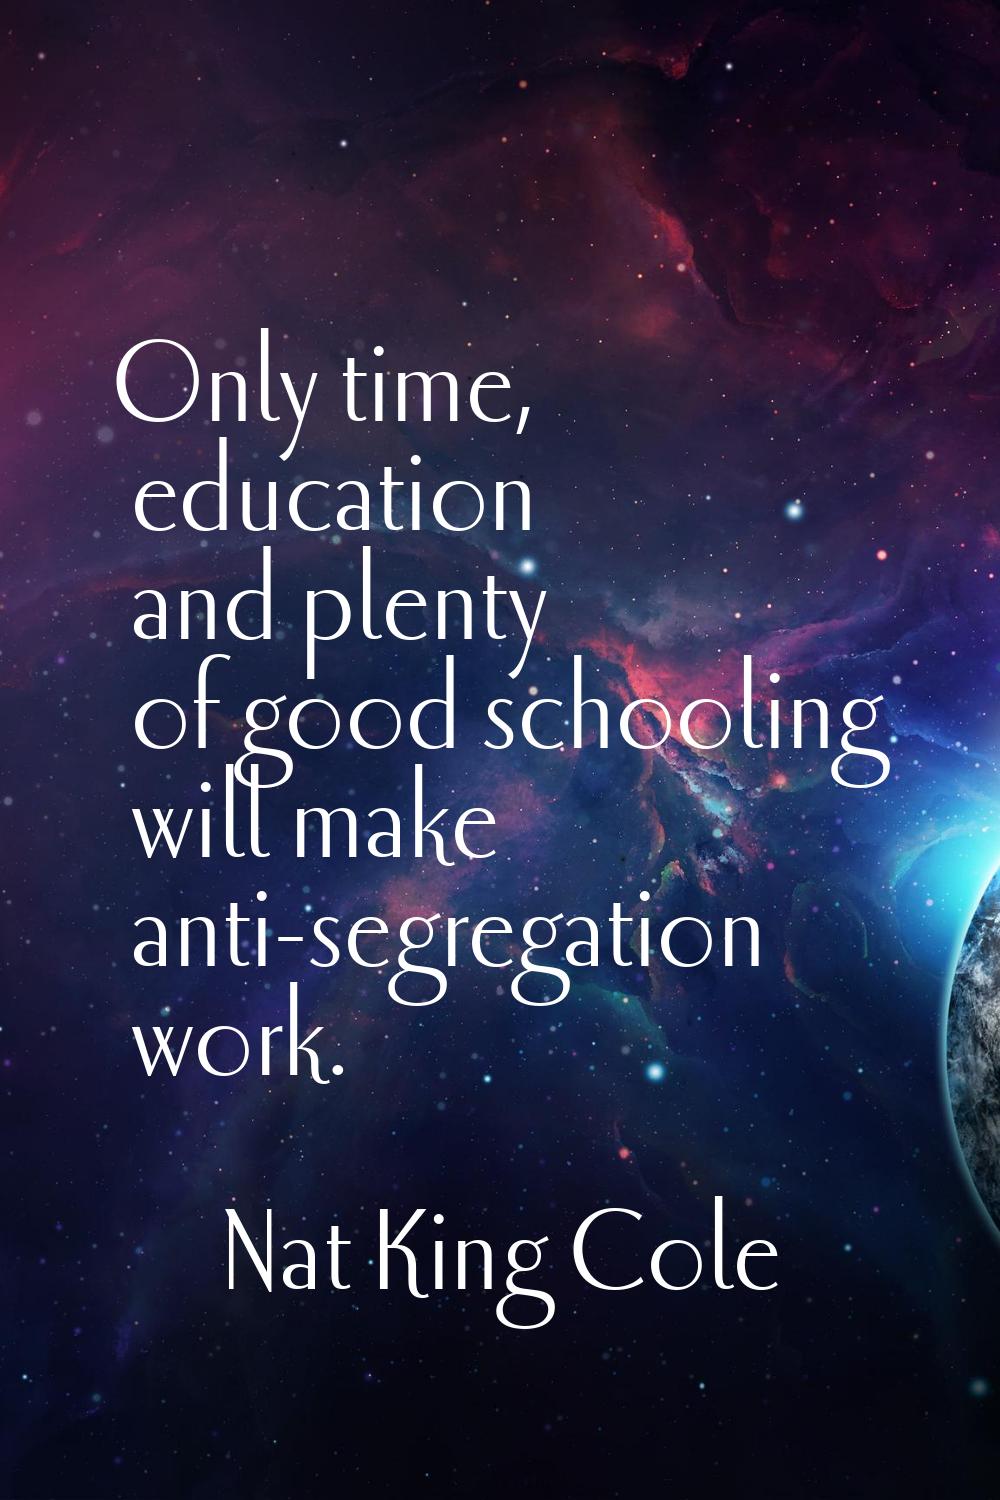 Only time, education and plenty of good schooling will make anti-segregation work.